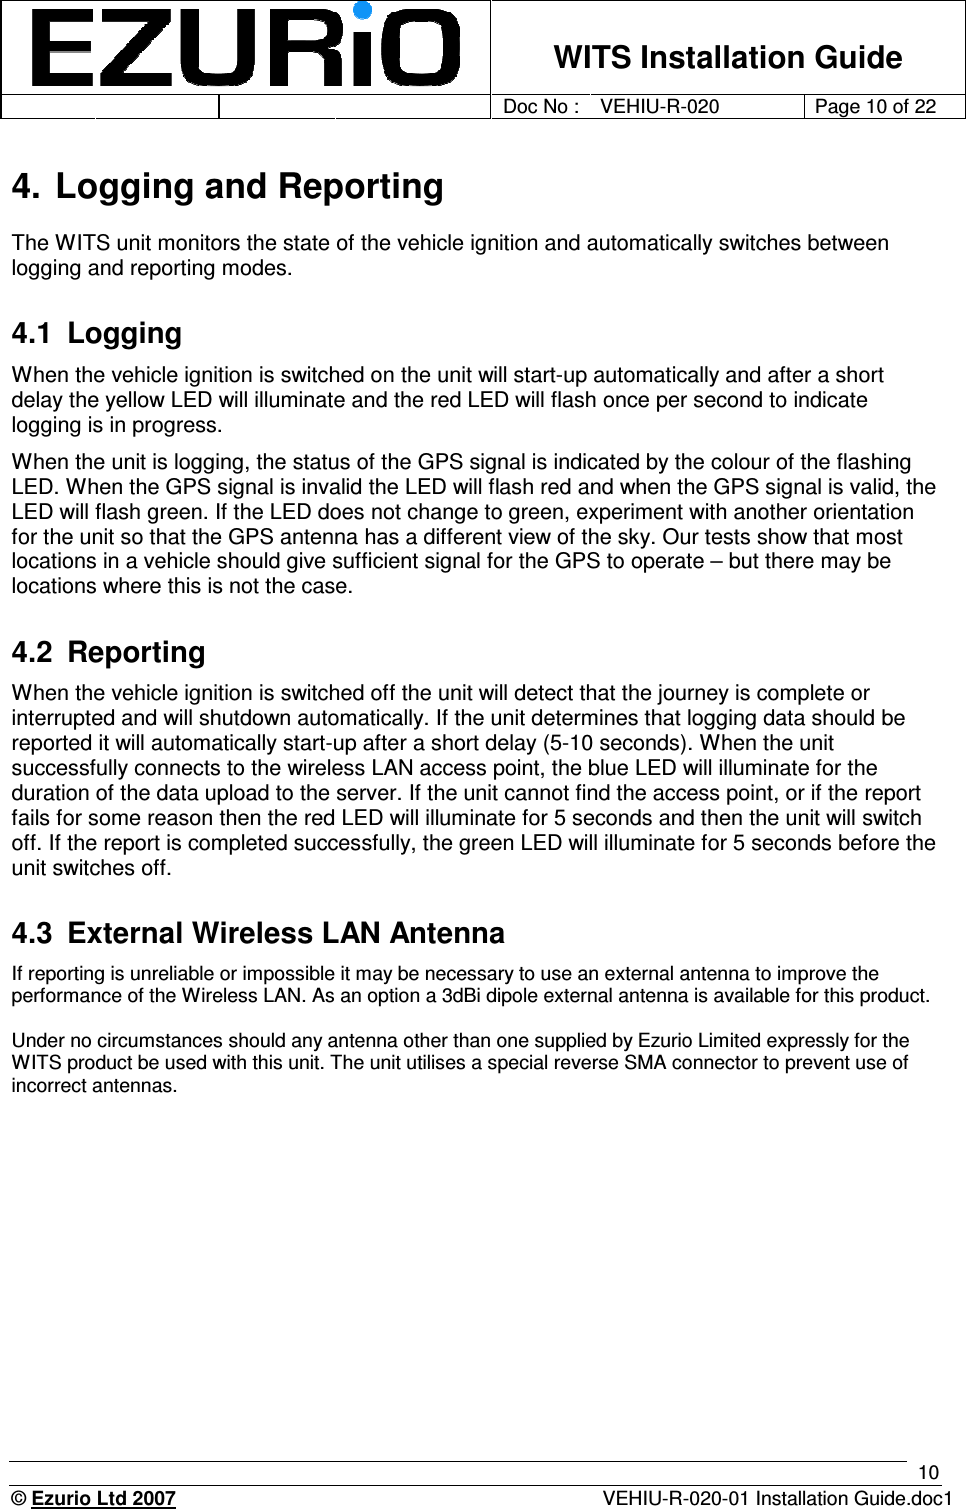    WITS Installation Guide         Doc No : VEHIU-R-020 Page 10 of 22      © Ezurio Ltd 2007  VEHIU-R-020-01 Installation Guide.doc1 10 4. Logging and Reporting The WITS unit monitors the state of the vehicle ignition and automatically switches between logging and reporting modes. 4.1  Logging When the vehicle ignition is switched on the unit will start-up automatically and after a short delay the yellow LED will illuminate and the red LED will flash once per second to indicate logging is in progress. When the unit is logging, the status of the GPS signal is indicated by the colour of the flashing LED. When the GPS signal is invalid the LED will flash red and when the GPS signal is valid, the LED will flash green. If the LED does not change to green, experiment with another orientation for the unit so that the GPS antenna has a different view of the sky. Our tests show that most locations in a vehicle should give sufficient signal for the GPS to operate – but there may be locations where this is not the case.  4.2  Reporting When the vehicle ignition is switched off the unit will detect that the journey is complete or interrupted and will shutdown automatically. If the unit determines that logging data should be reported it will automatically start-up after a short delay (5-10 seconds). When the unit successfully connects to the wireless LAN access point, the blue LED will illuminate for the duration of the data upload to the server. If the unit cannot find the access point, or if the report fails for some reason then the red LED will illuminate for 5 seconds and then the unit will switch off. If the report is completed successfully, the green LED will illuminate for 5 seconds before the unit switches off.  4.3  External Wireless LAN Antenna If reporting is unreliable or impossible it may be necessary to use an external antenna to improve the performance of the Wireless LAN. As an option a 3dBi dipole external antenna is available for this product.   Under no circumstances should any antenna other than one supplied by Ezurio Limited expressly for the WITS product be used with this unit. The unit utilises a special reverse SMA connector to prevent use of incorrect antennas.  